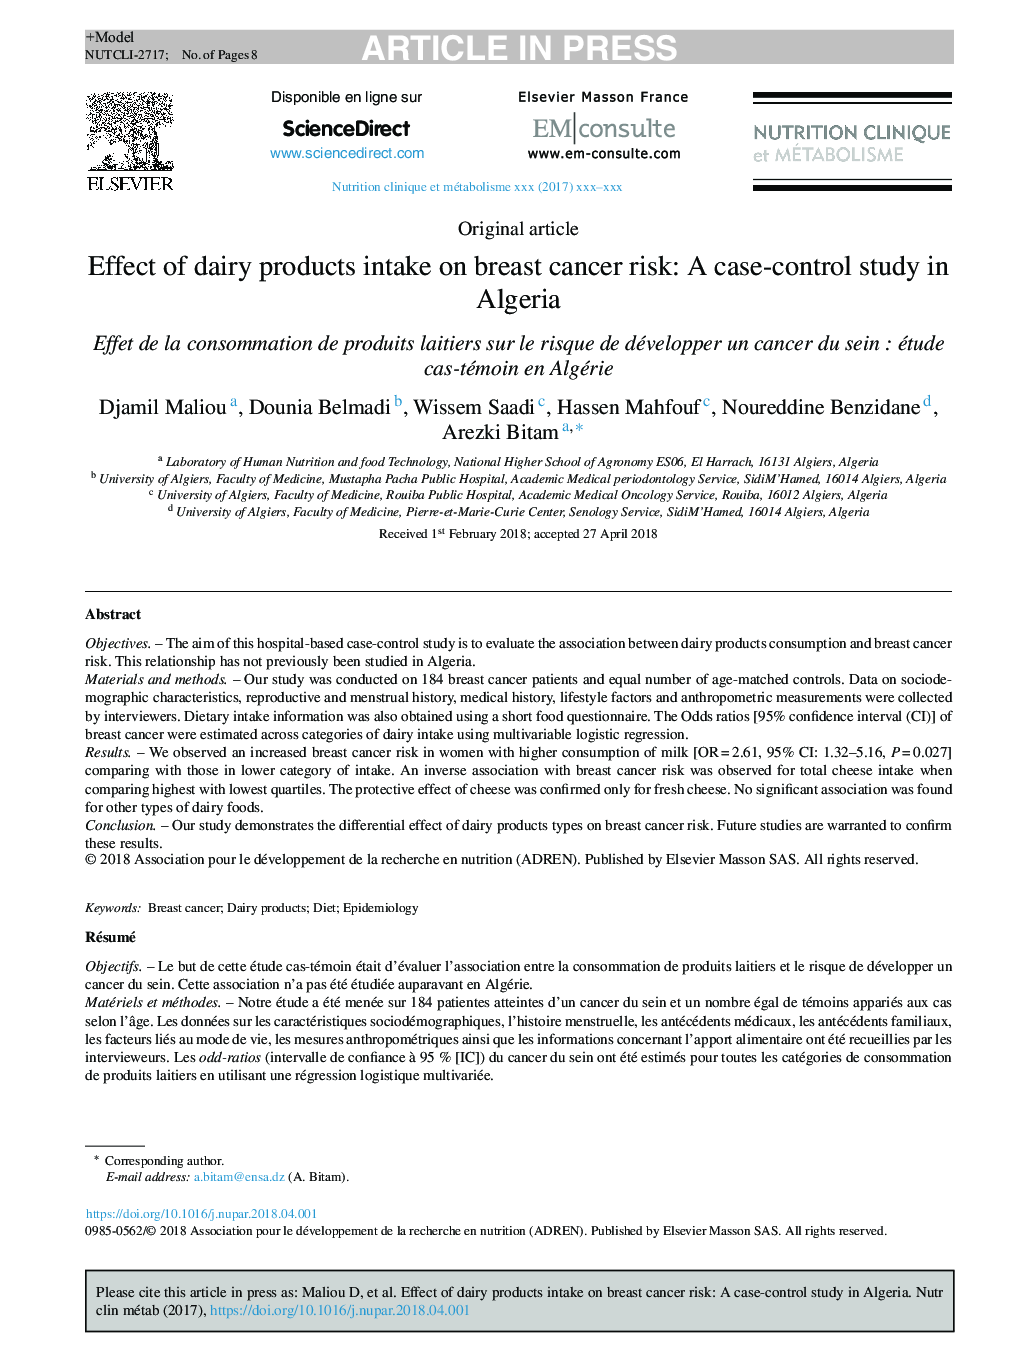 Effect of dairy products intake on breast cancer risk: A case-control study in Algeria